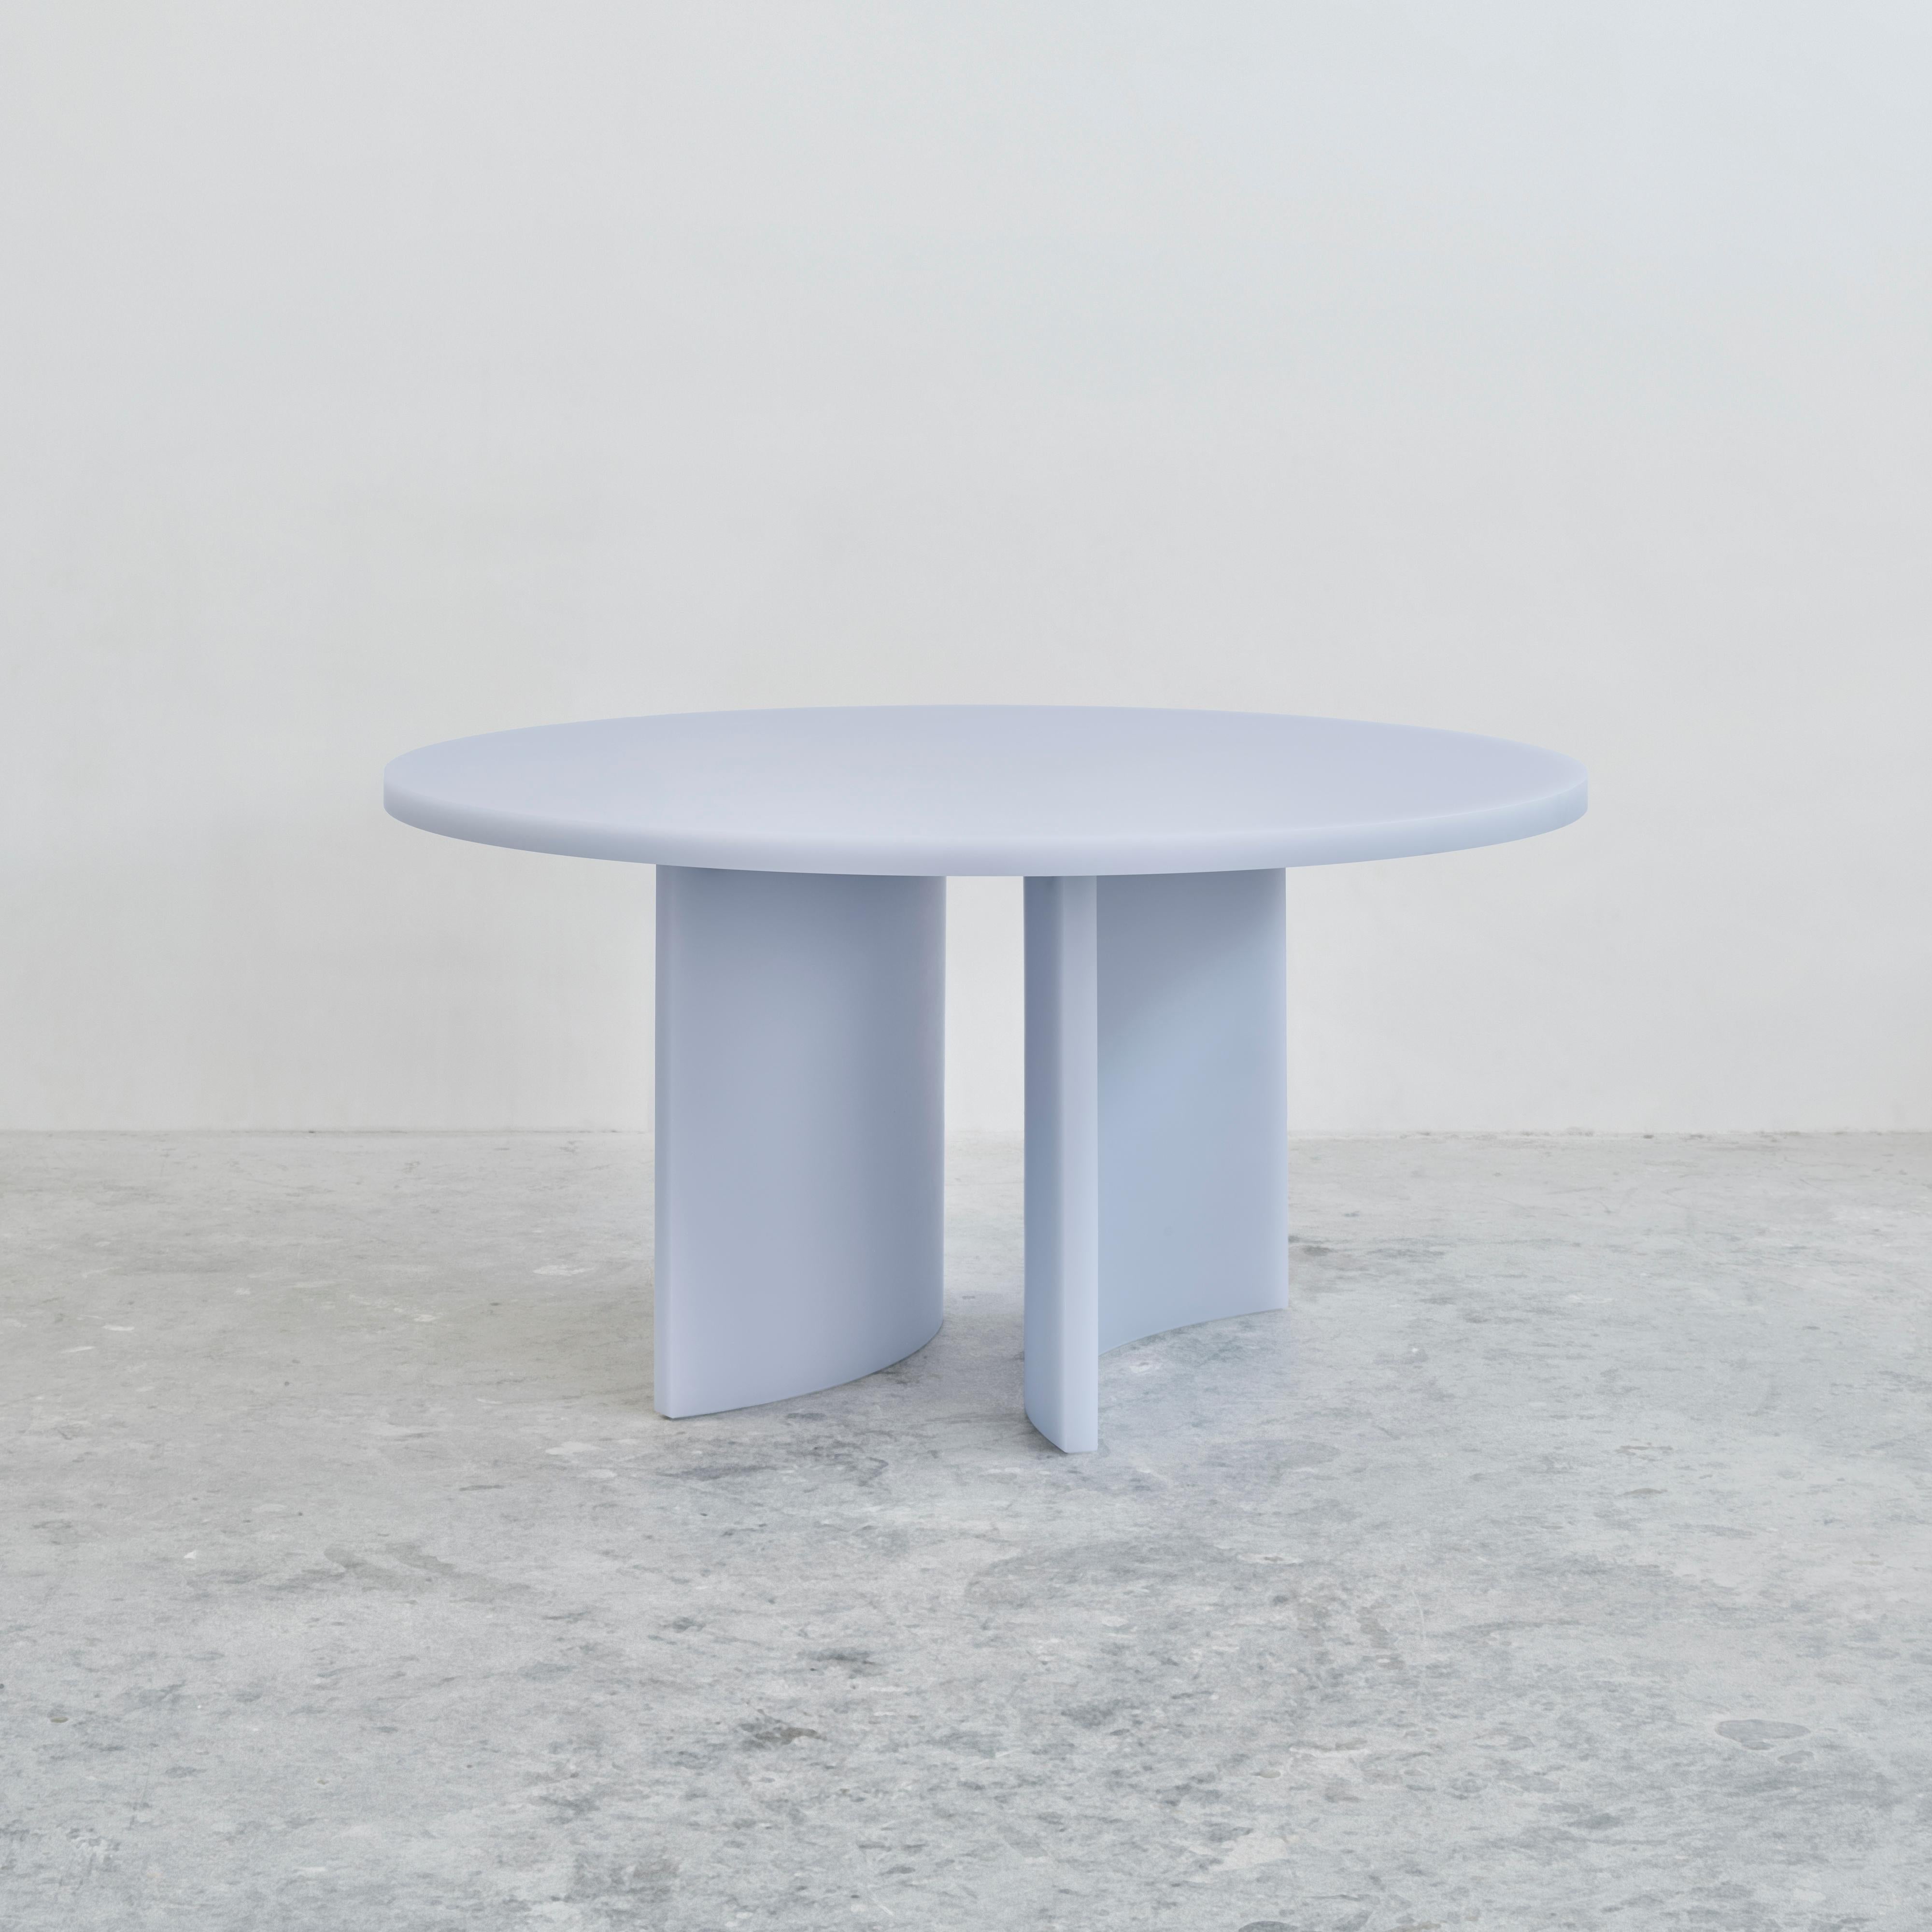 Now a contemporary design classic, Sabine Marcelis’ Soap table, is a dynamic dinner setting, featuring her signature resin. It is designed with the sound psychology of dining in mind. So when people are dining, things they put down on the table